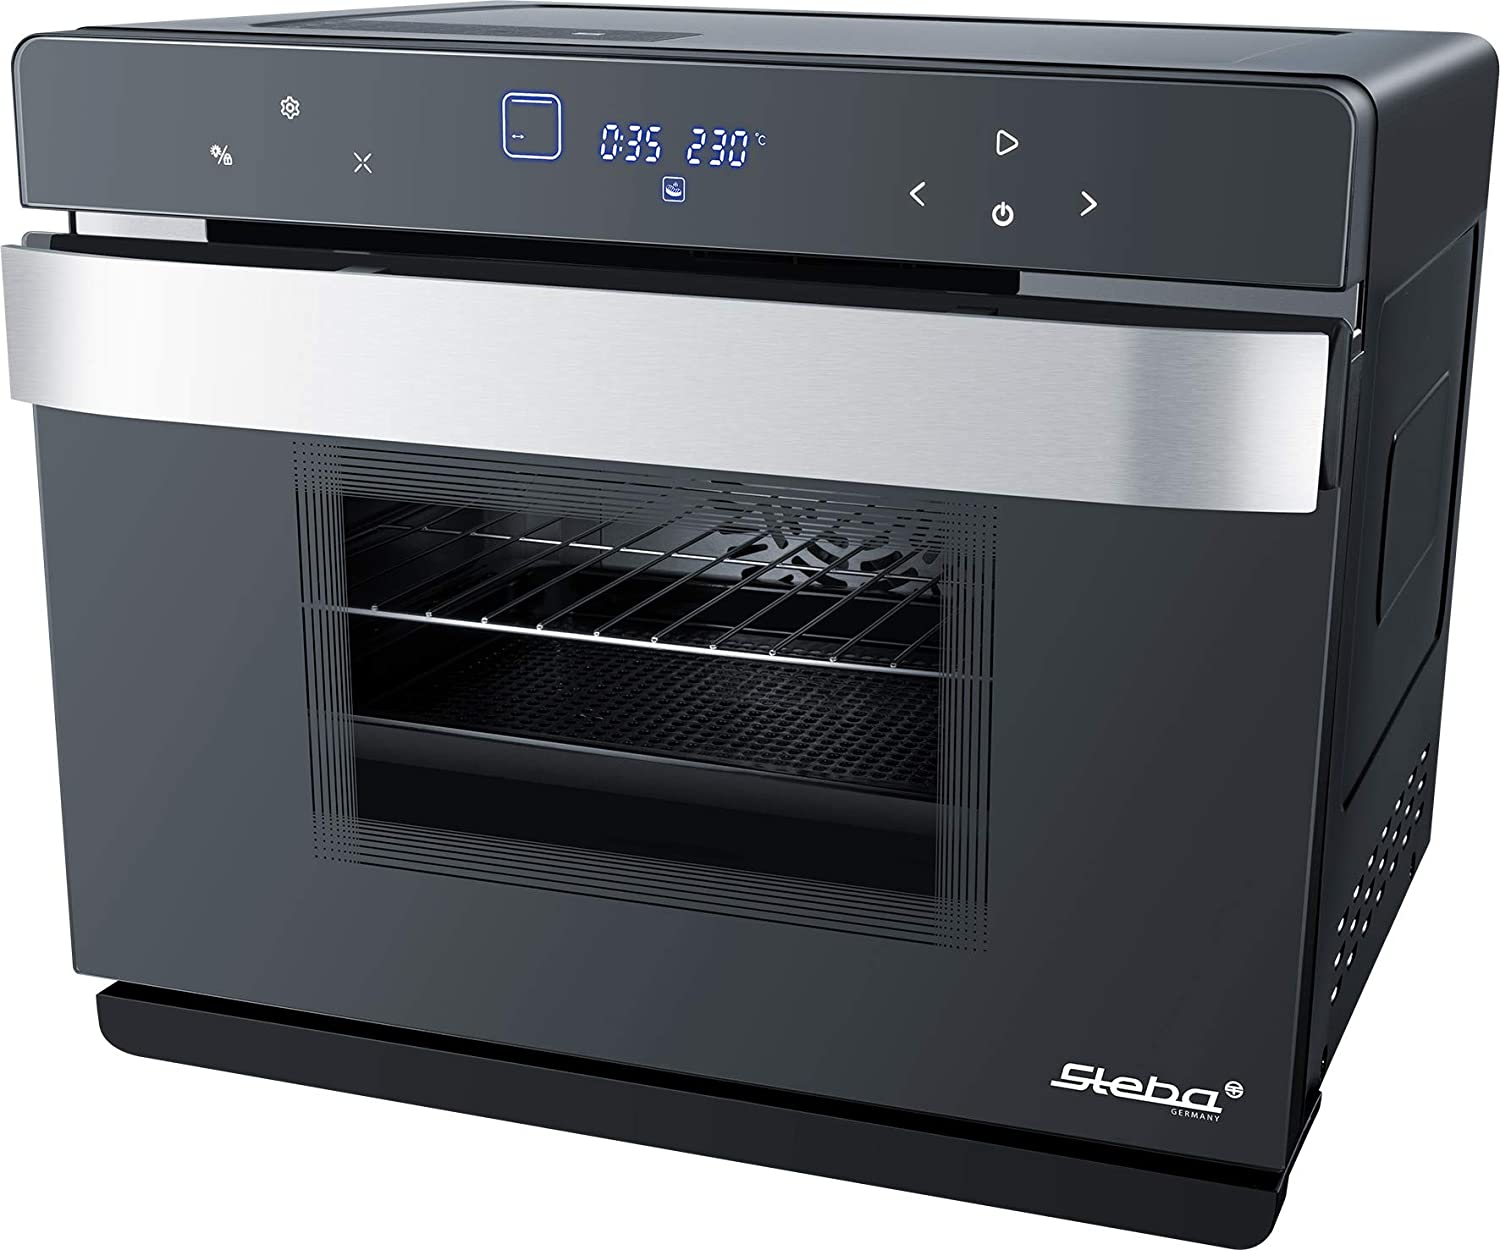 Steba DG 40 Multifunctional Steam Oven with Hot Steam for Gentle Quick Cooking, Effective Housing Insulation for Low Energy Consumption, 49 Automatic Programmes, 37 Litres